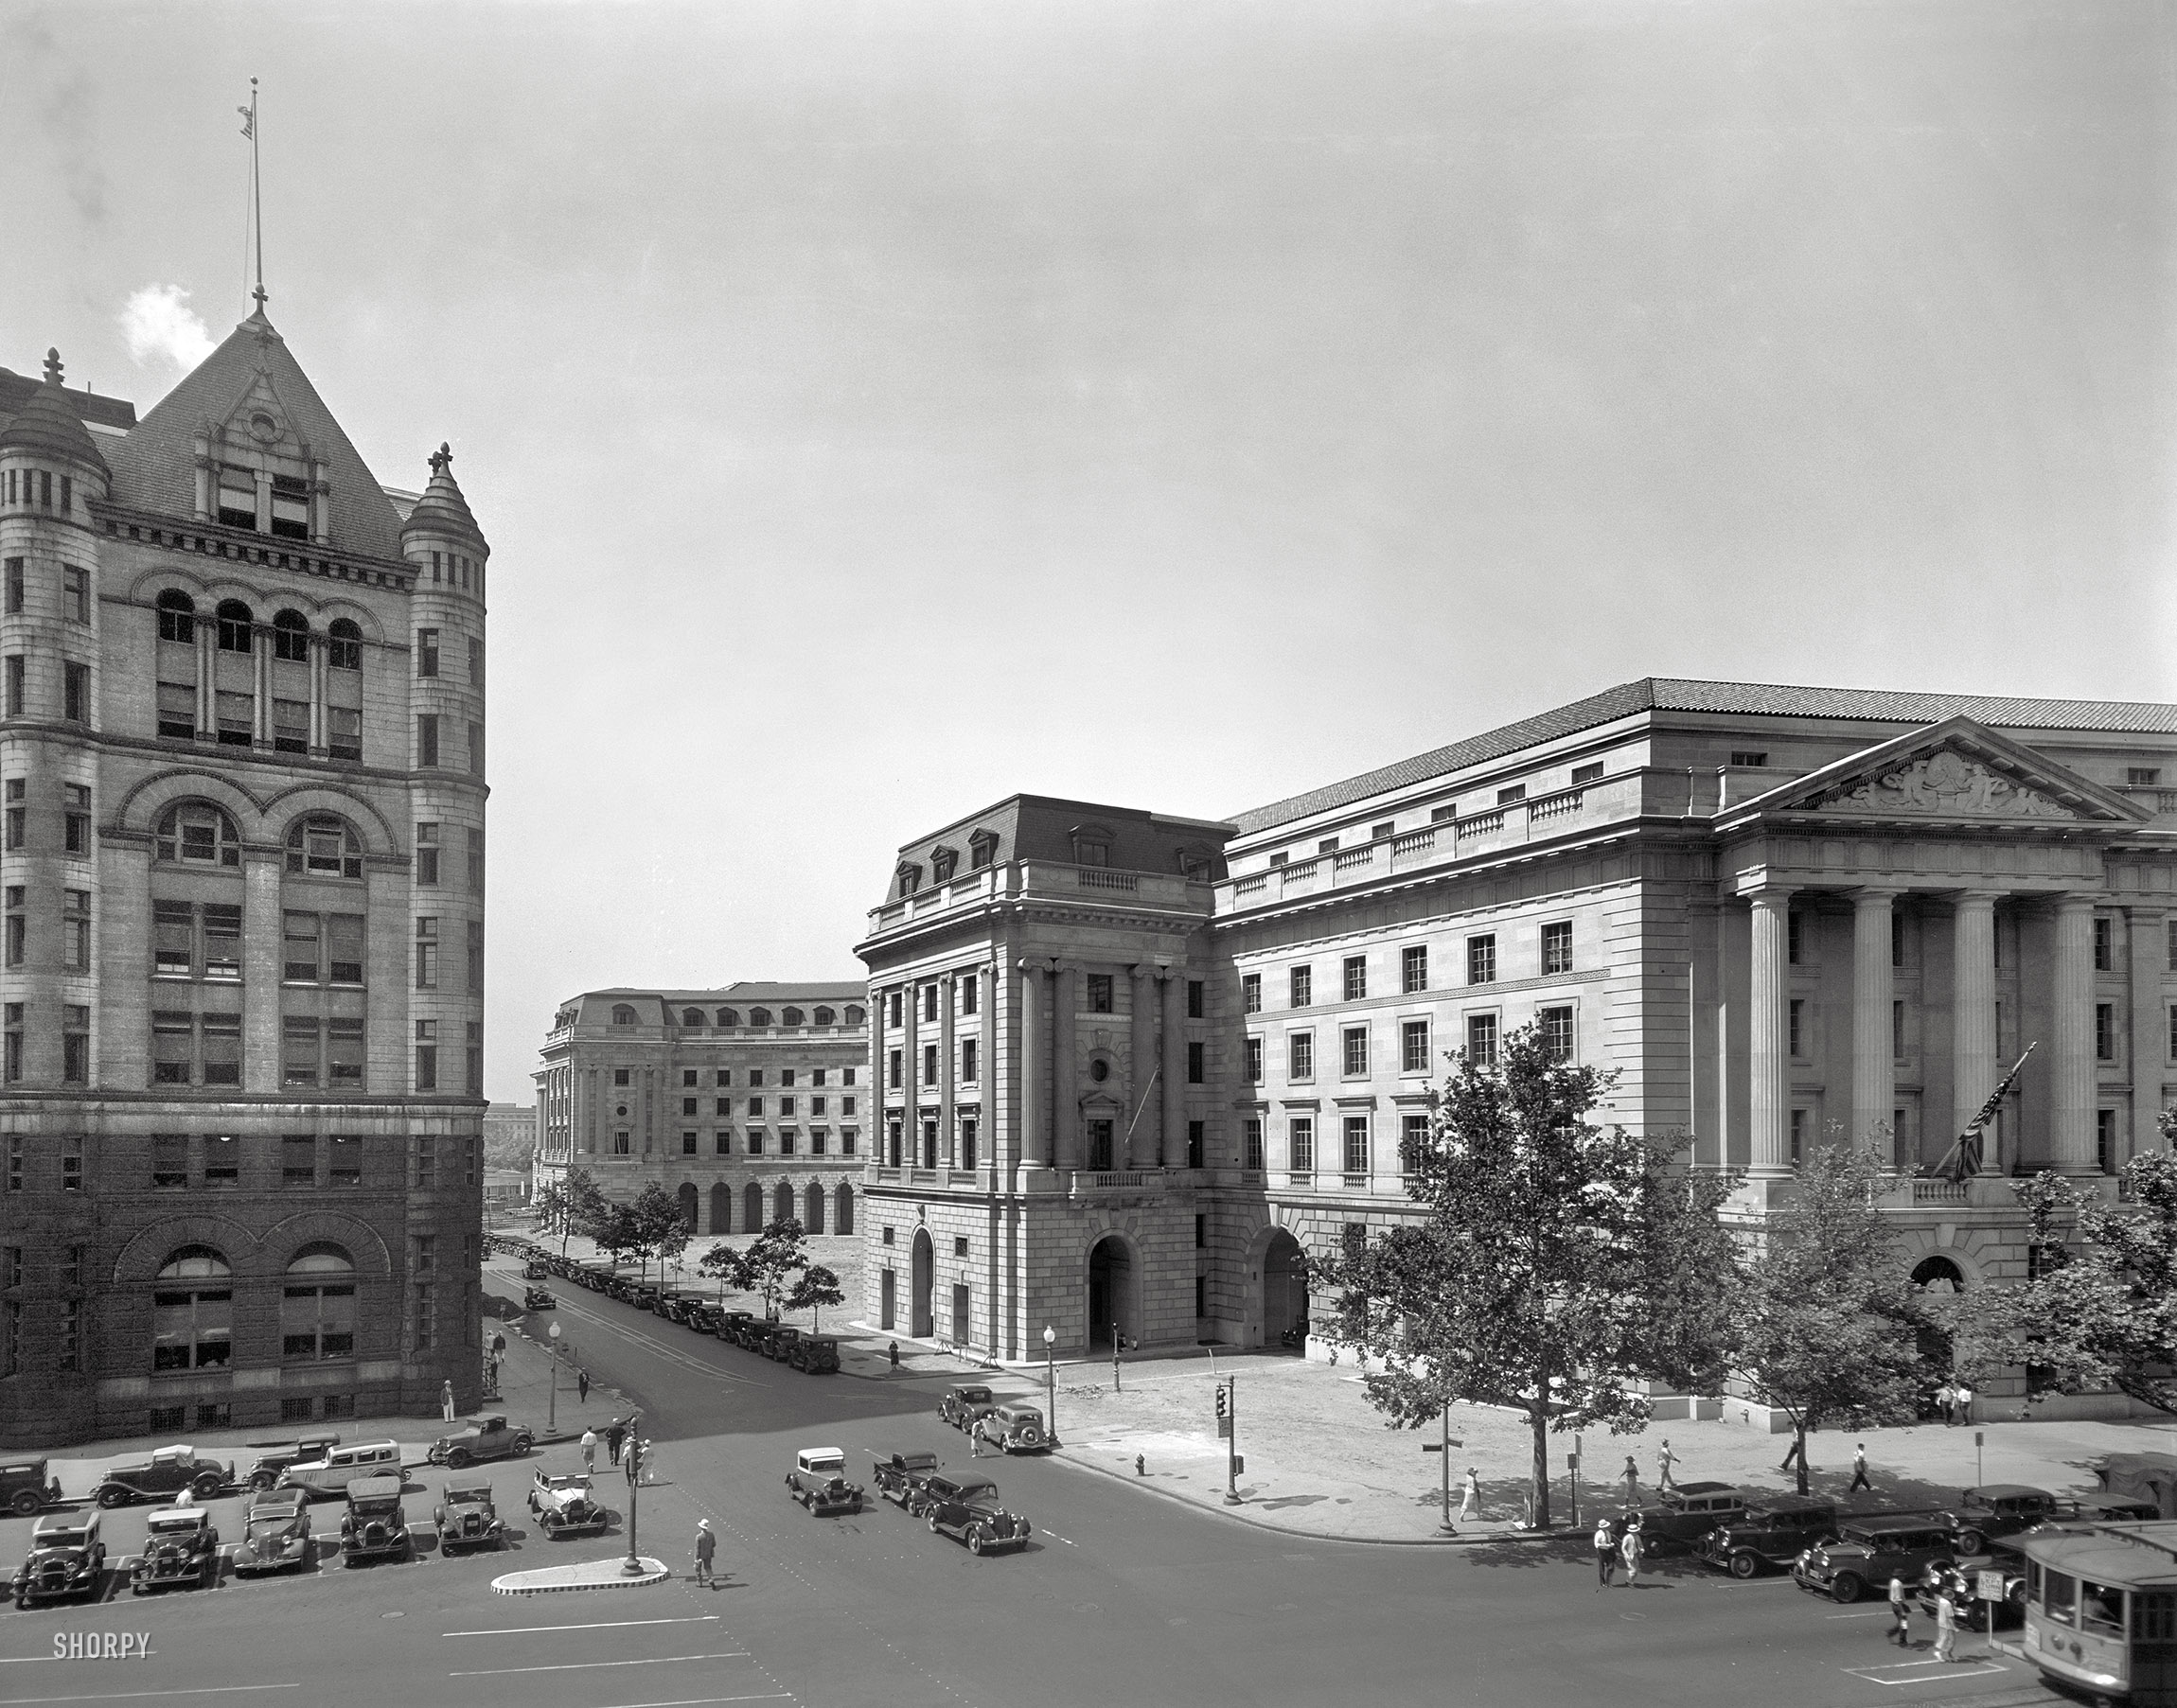 Washington, D.C., circa 1935. "Post Office Department Building (Old Post Office Building or Pavilion). Old (far left) and new Post Office Department." The "new" building, inspired by the Place Vendome in Paris, is now the Ariel Rios Federal Building. 8x10 nitrate negative by Theodor Horydczak. View full size.
